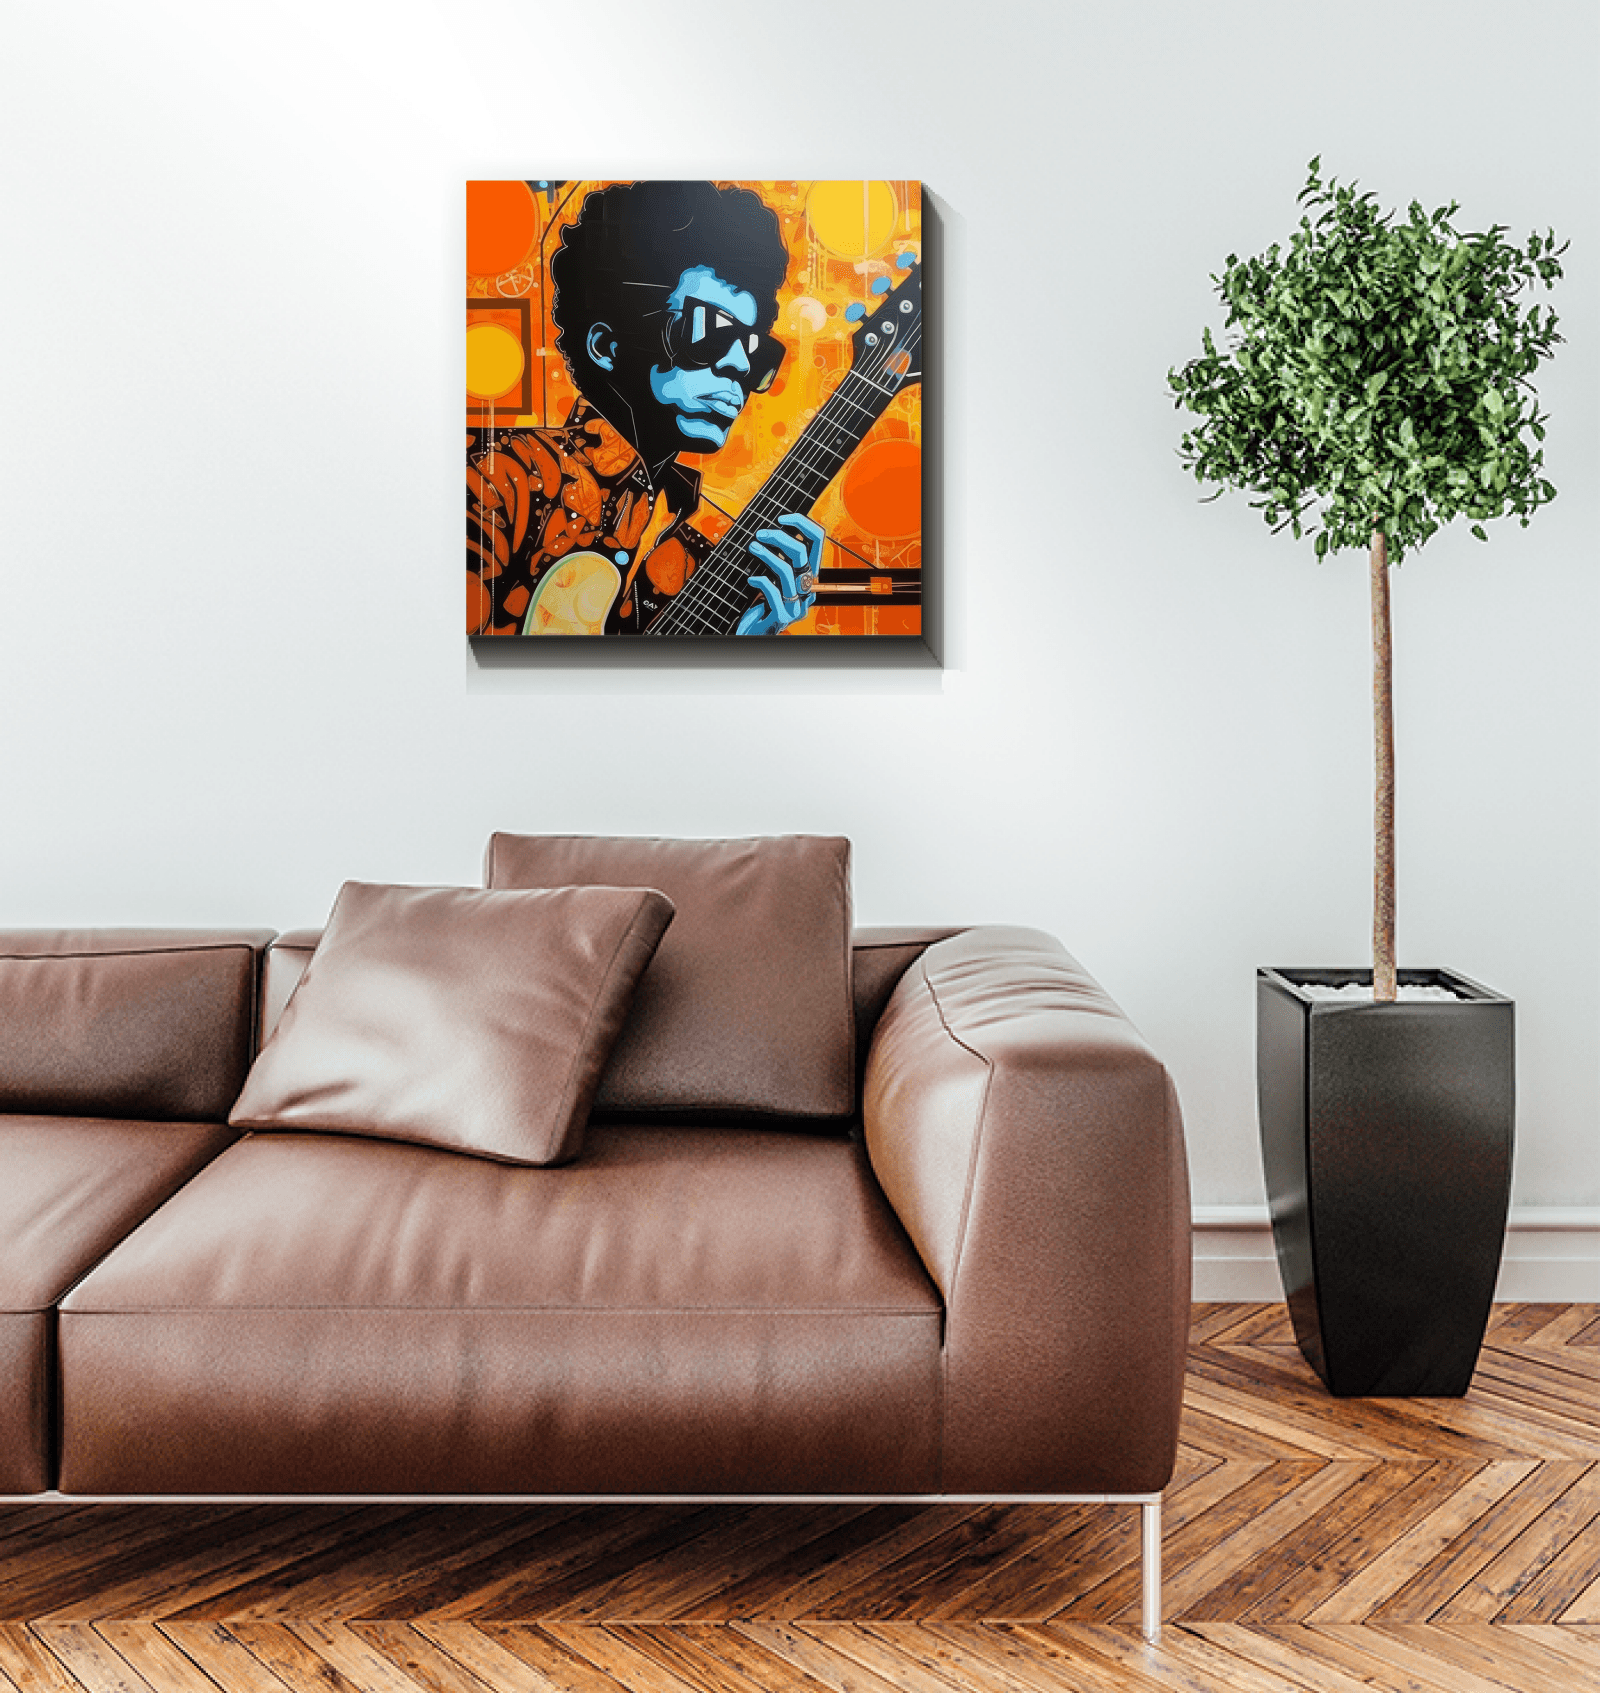 Vibrant Wrapped Canvas Featuring Pop Music Theme.